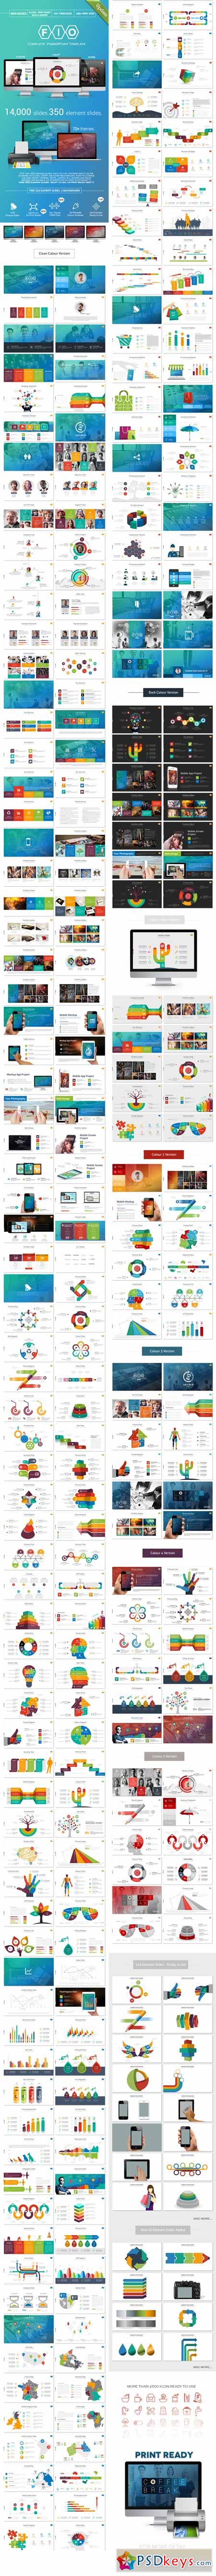 Fio - Complete Powerpoint Template - Print Ready 11084953